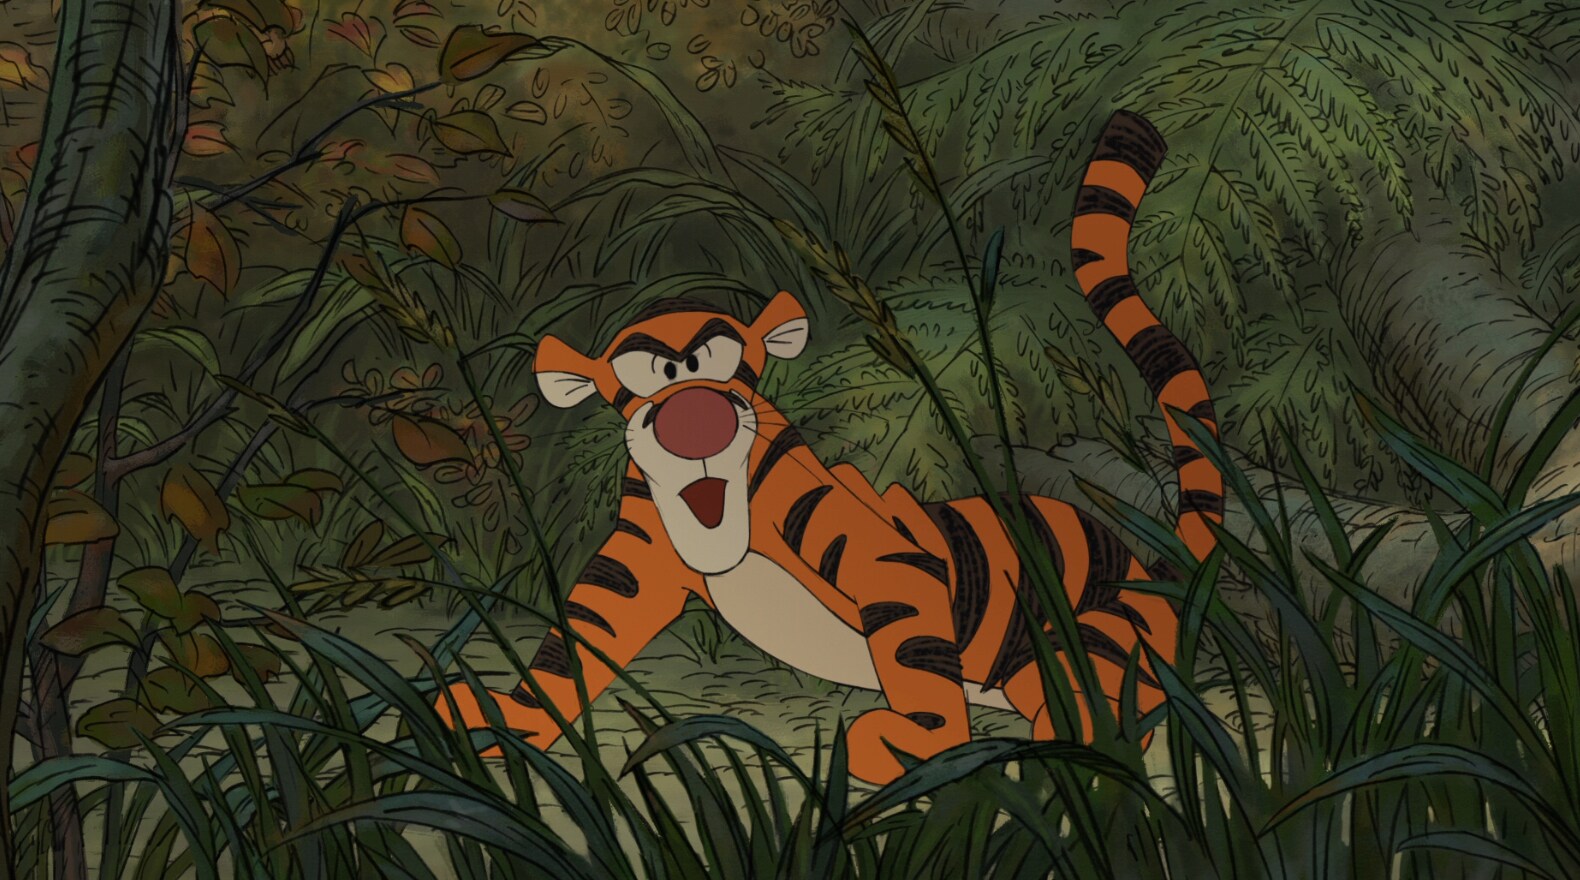 Only a Tigger can catch a Backson.